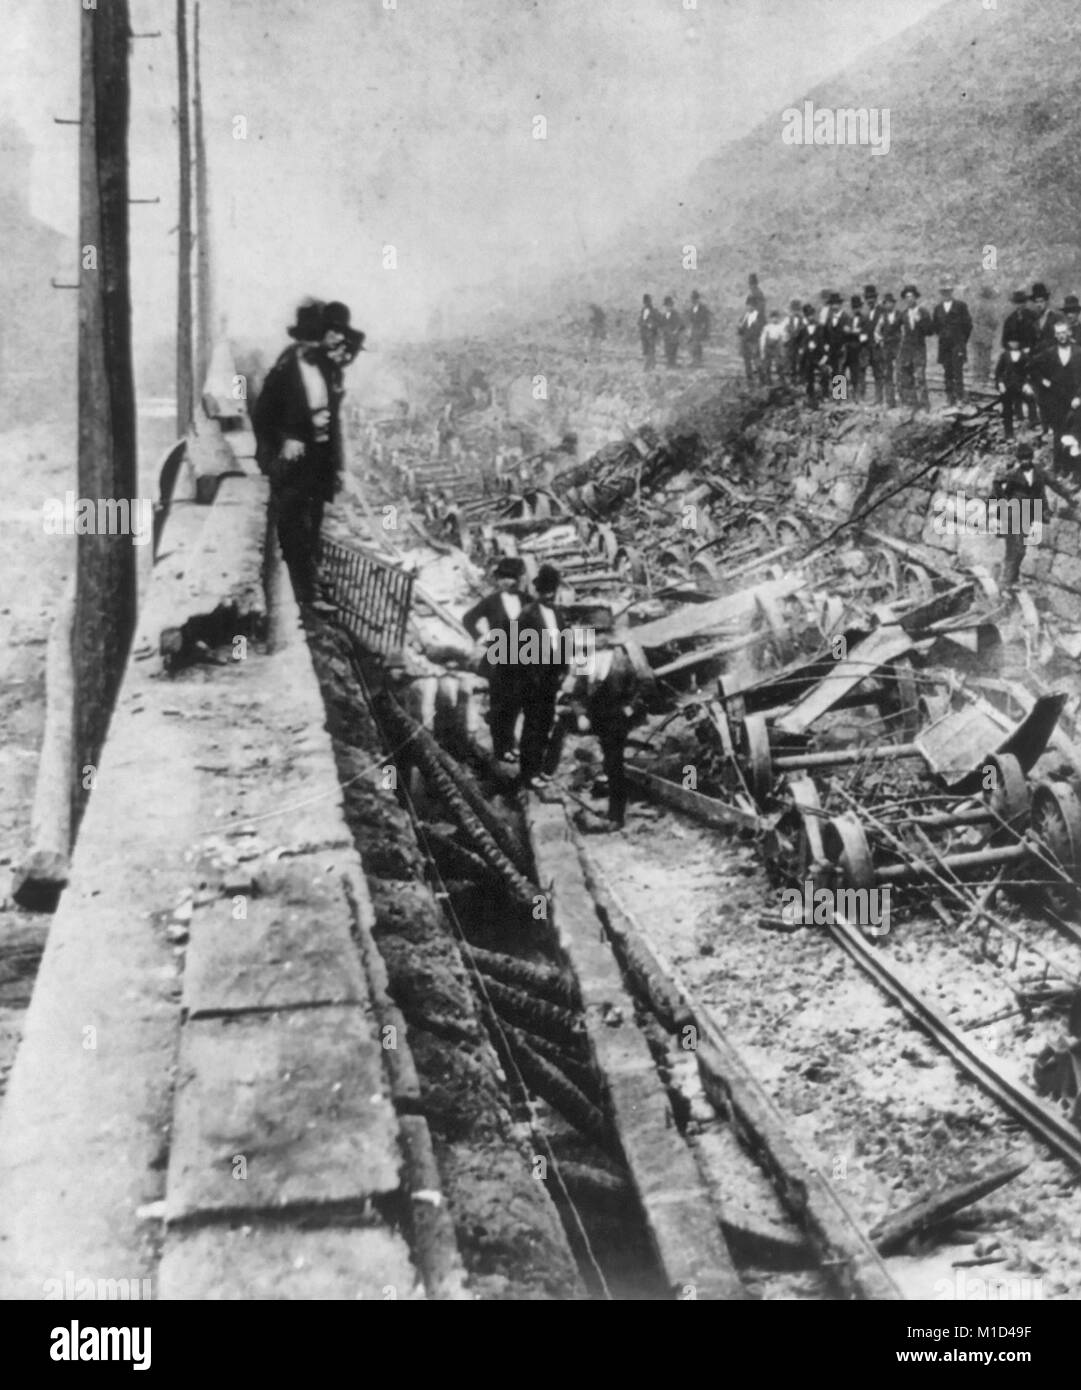 The Devastation of Railroad Equipment, Cars, and Locomotives during Railroad Riots 1877 Stock Photo